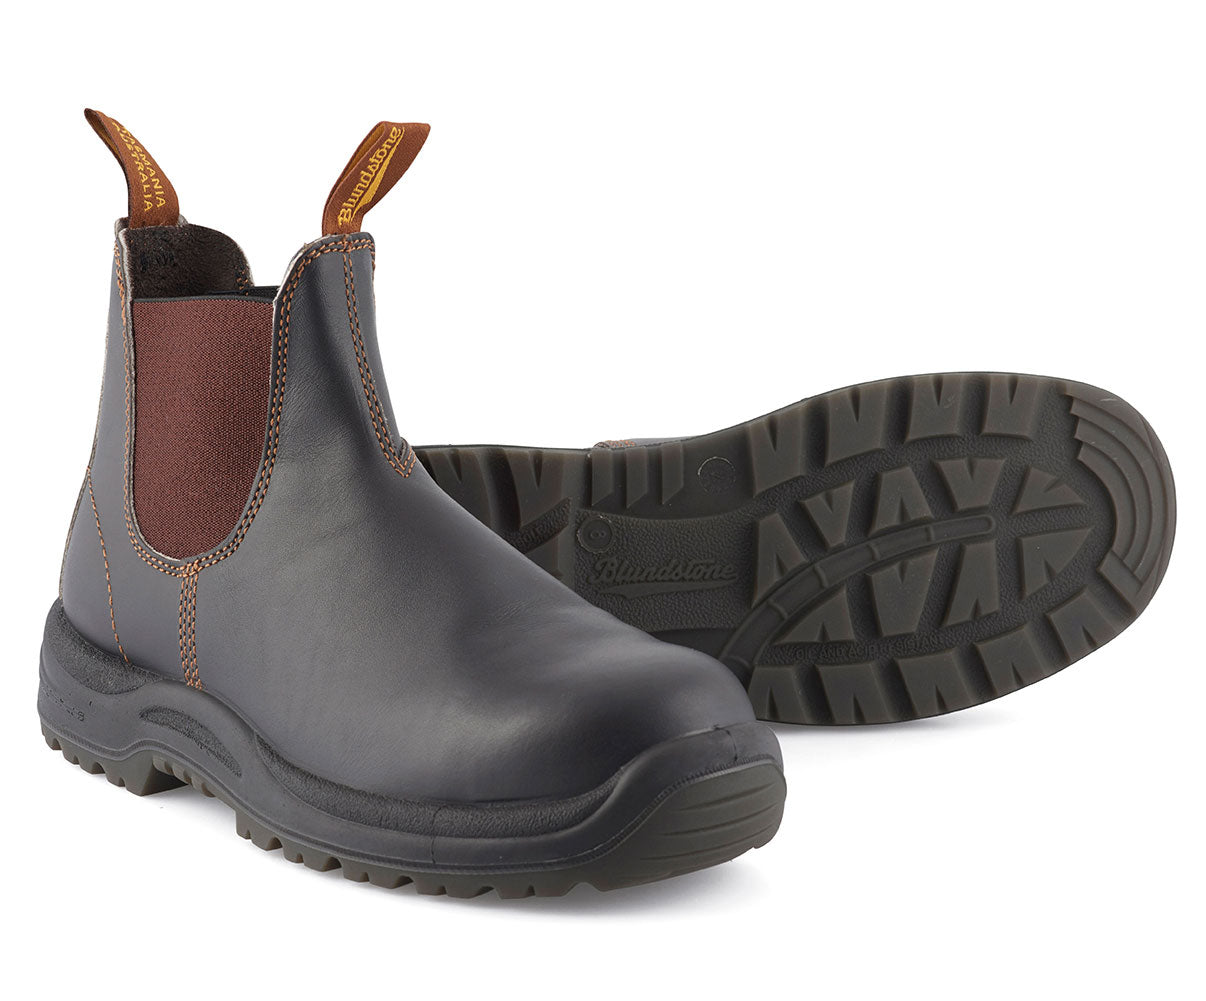 Blundstone 192 Safety Boots in Brown